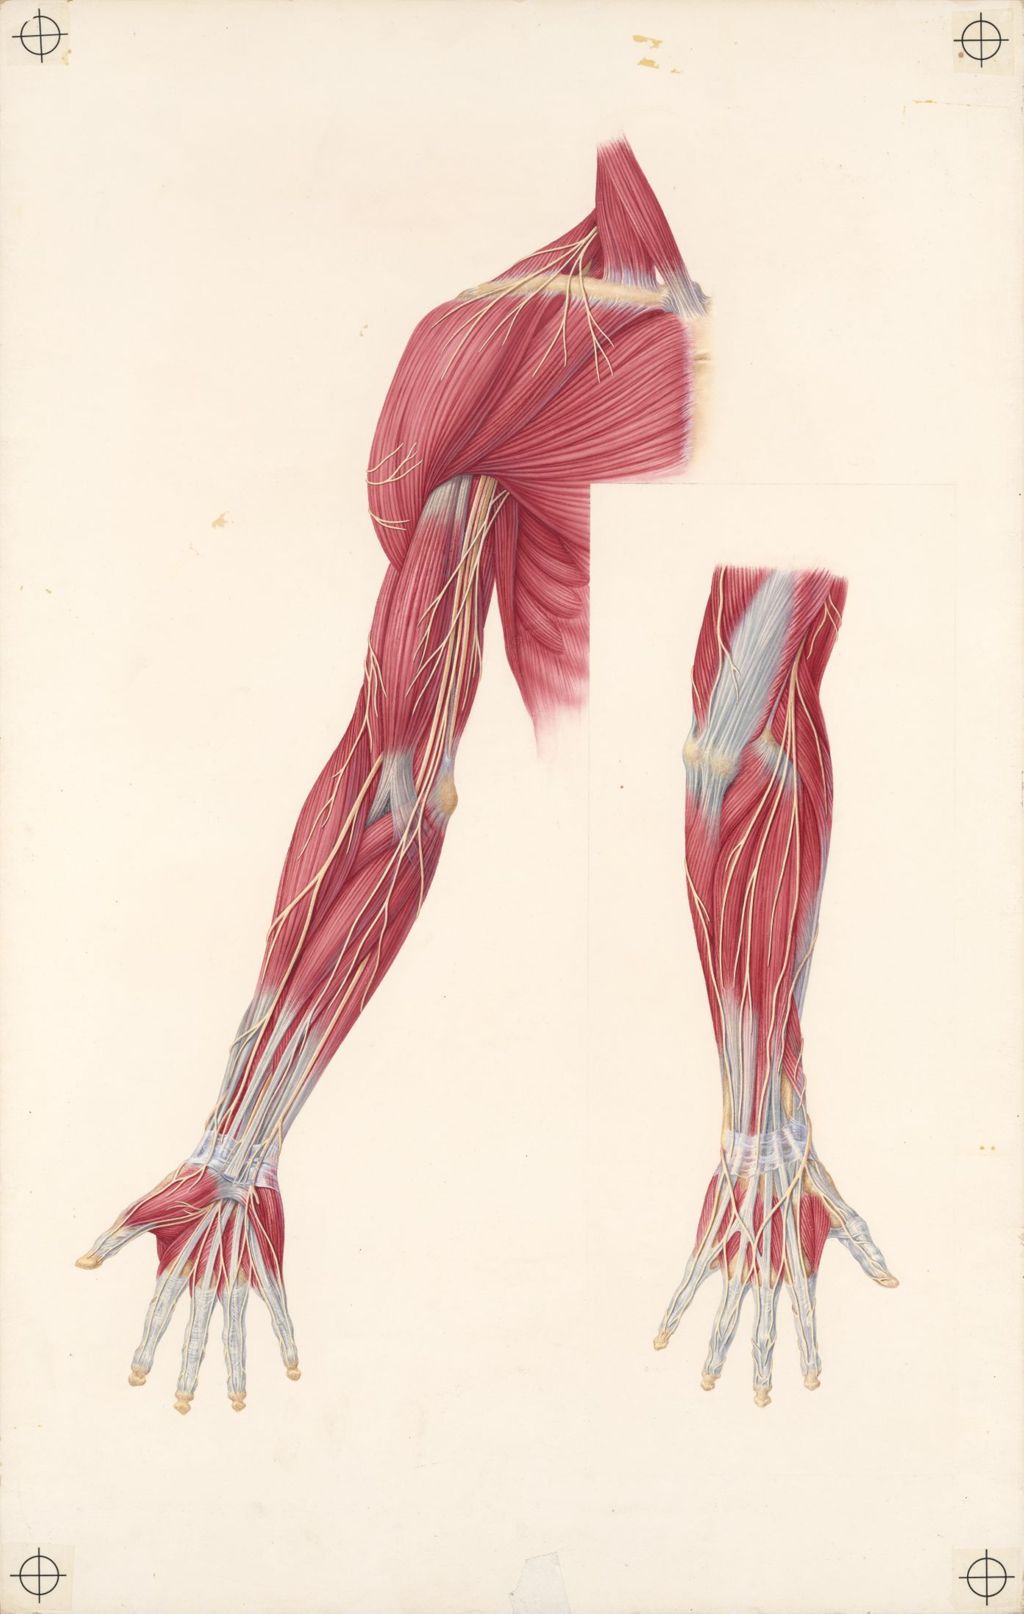 Miniature of Doctor-patient explanatory atlas of anatomy, Plate 2, the cutaneous nerves of the upper limb superimposed on the musculature